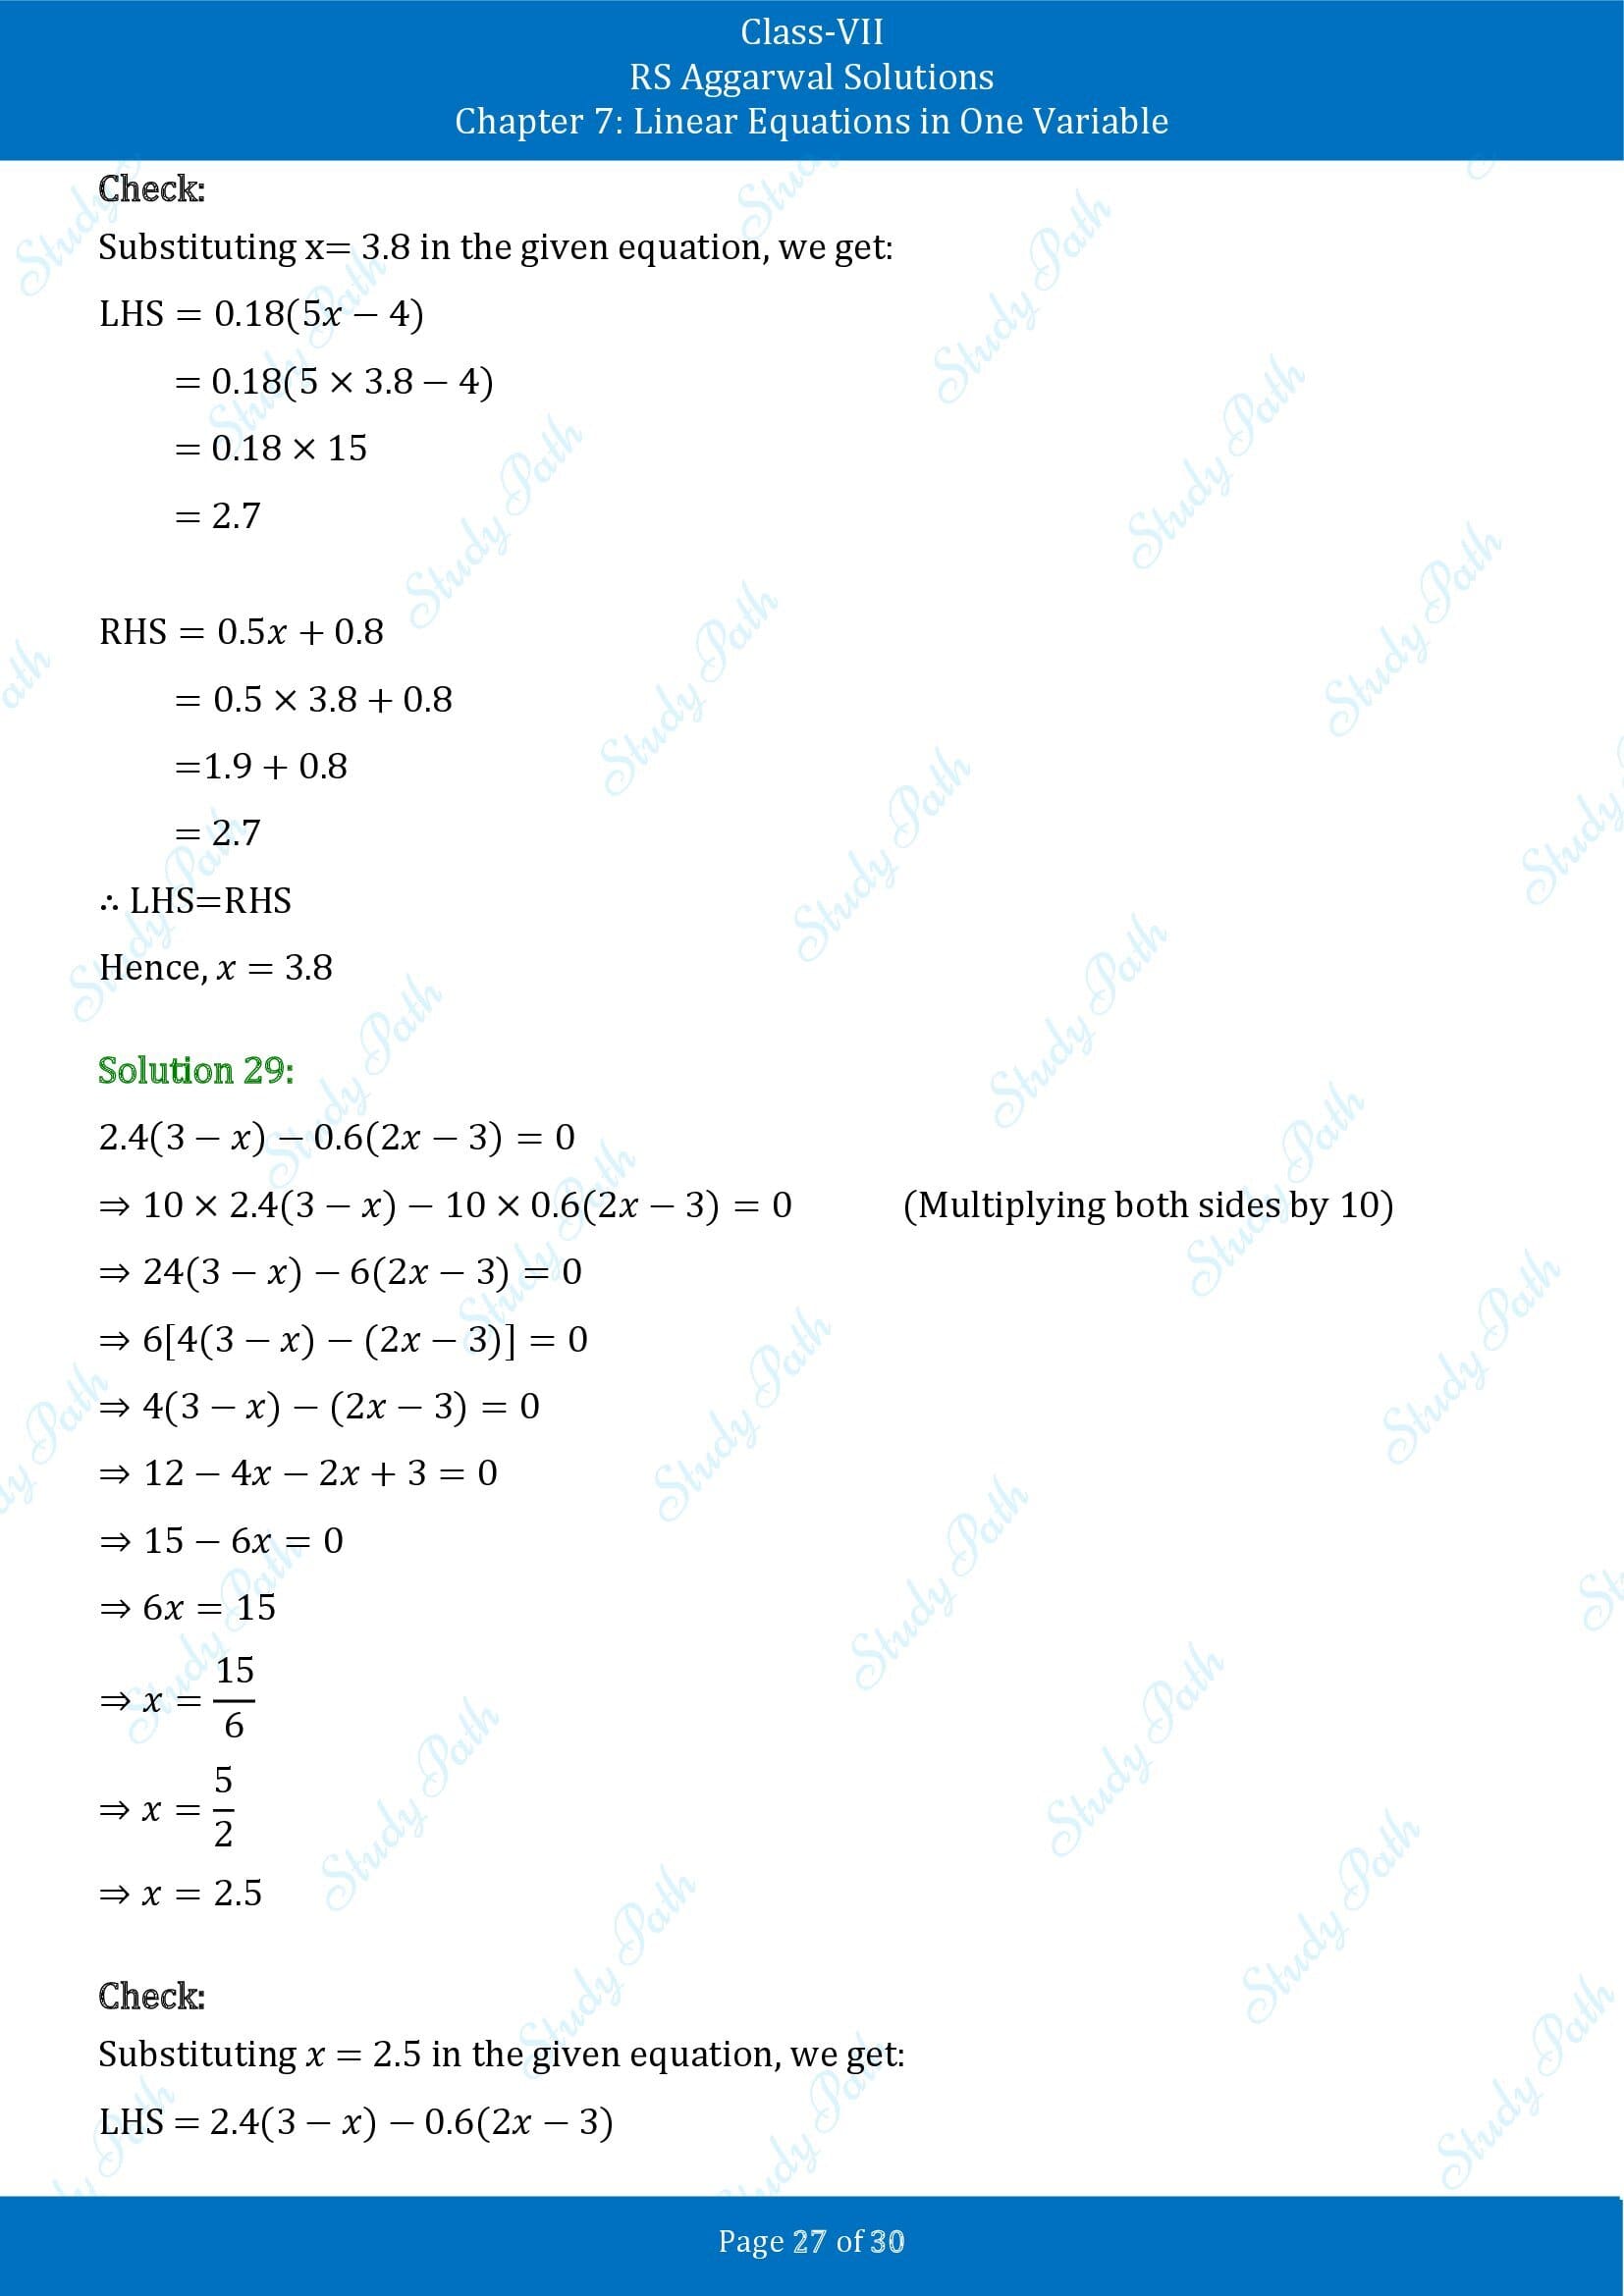 RS Aggarwal Solutions Class 7 Chapter 7 Linear Equations in One Variable Exercise 7A 00027